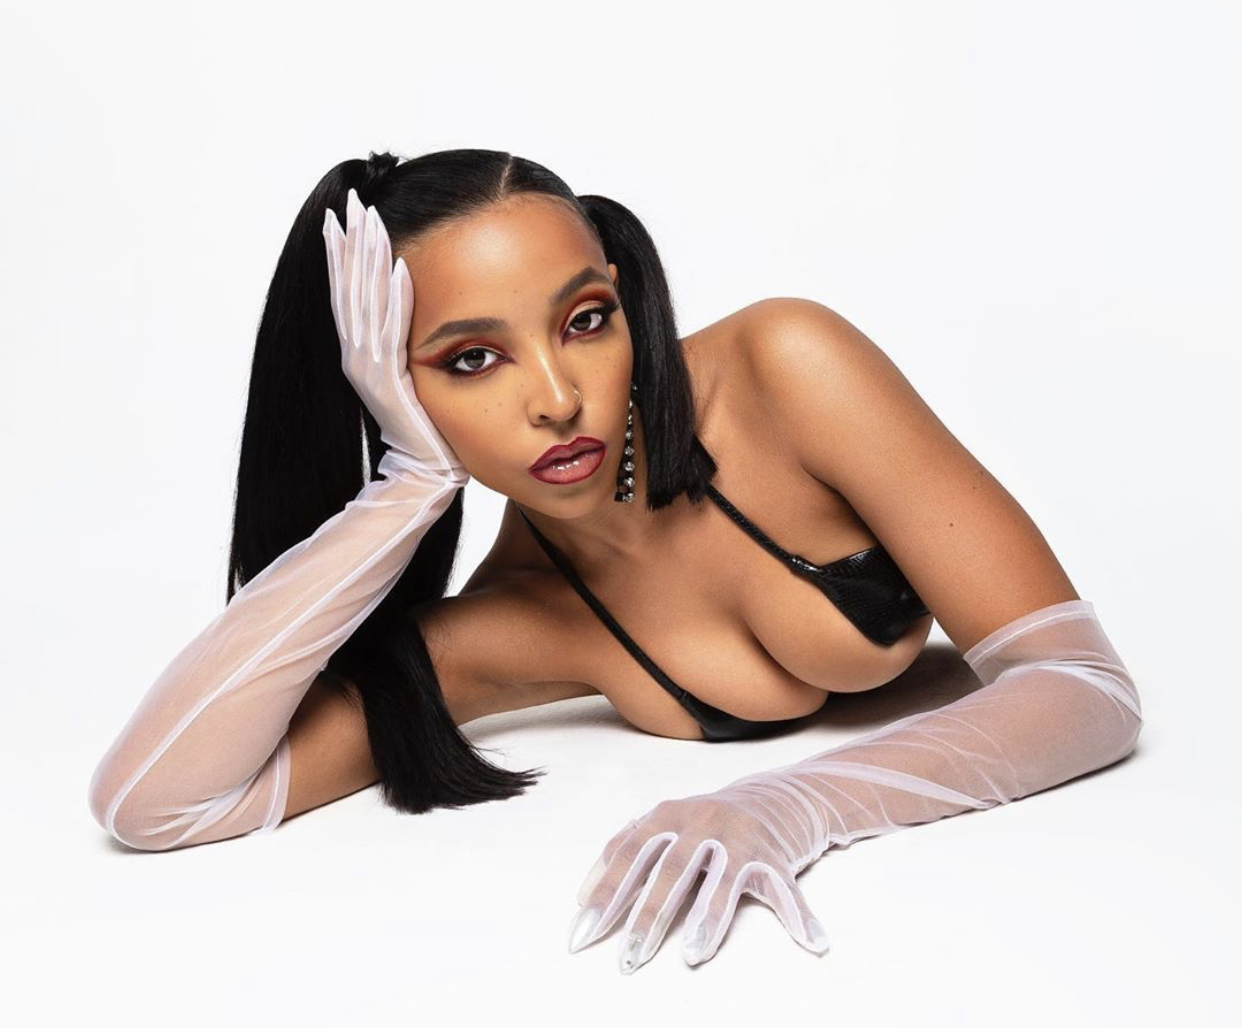 Tinashe Releases 'Songs for You' EP Ft. 6lack, G-Eazy & Ms. Banks ...